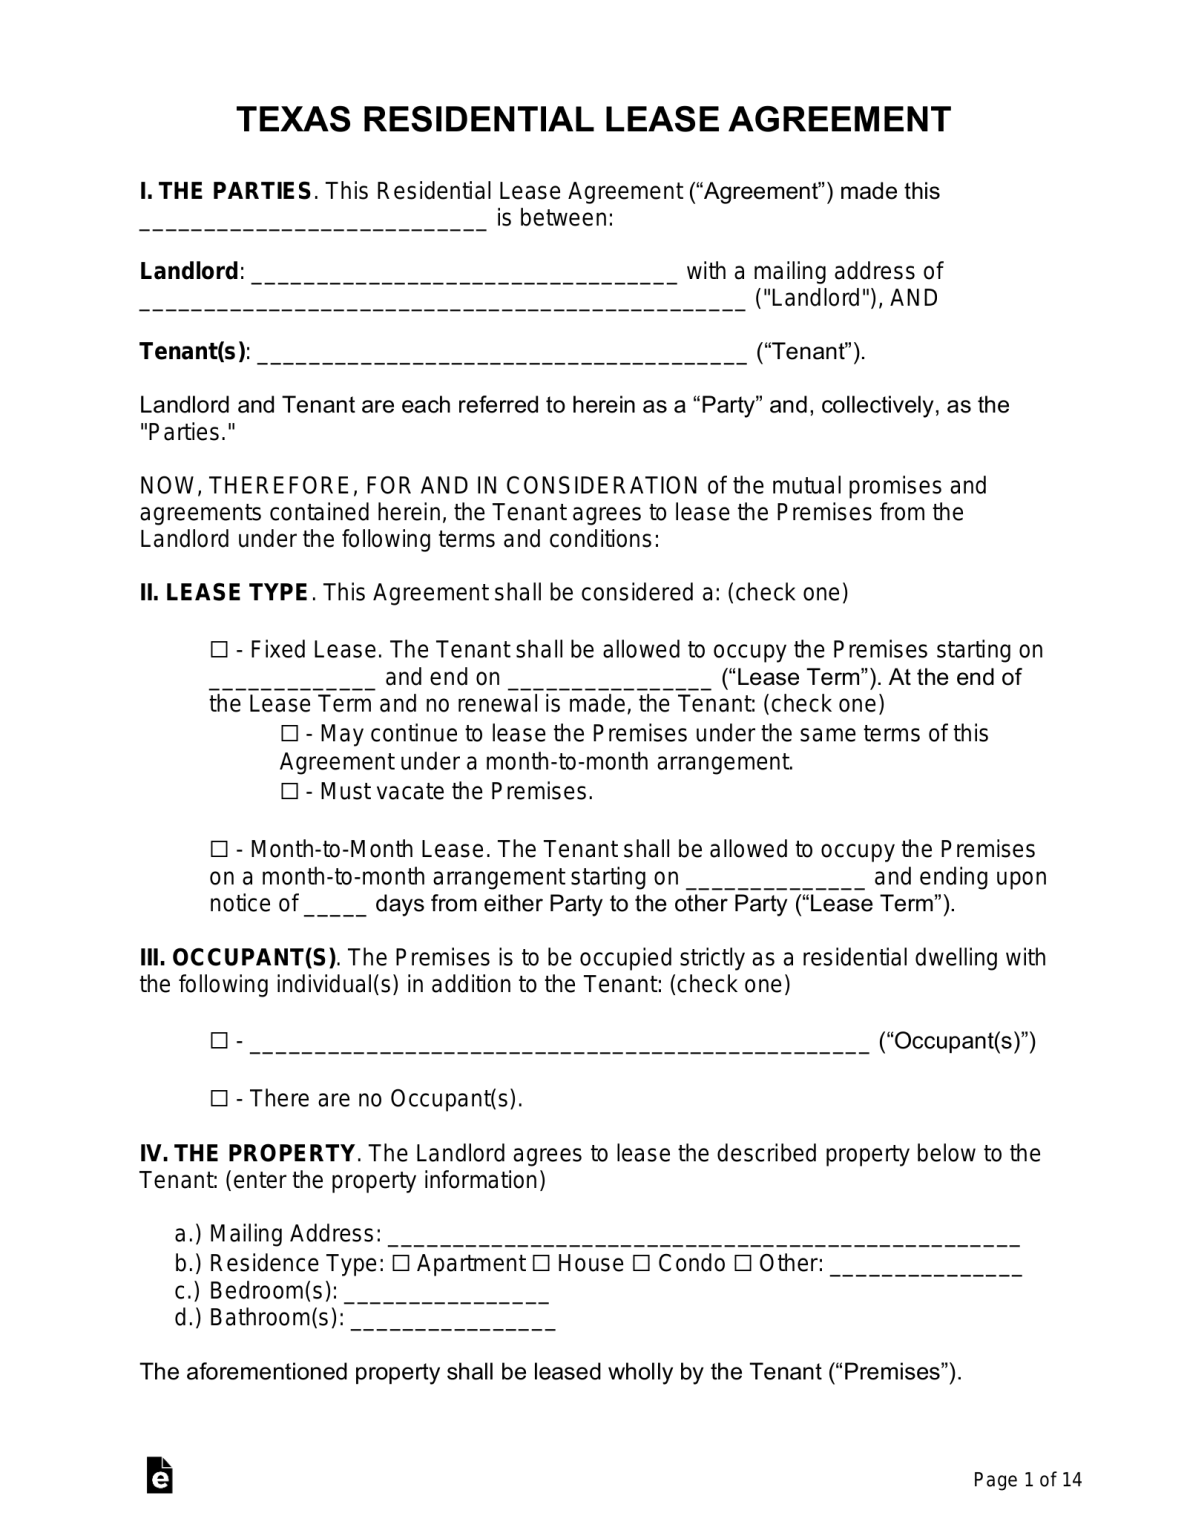 free-texas-lease-agreement-templates-8-pdf-word-eforms